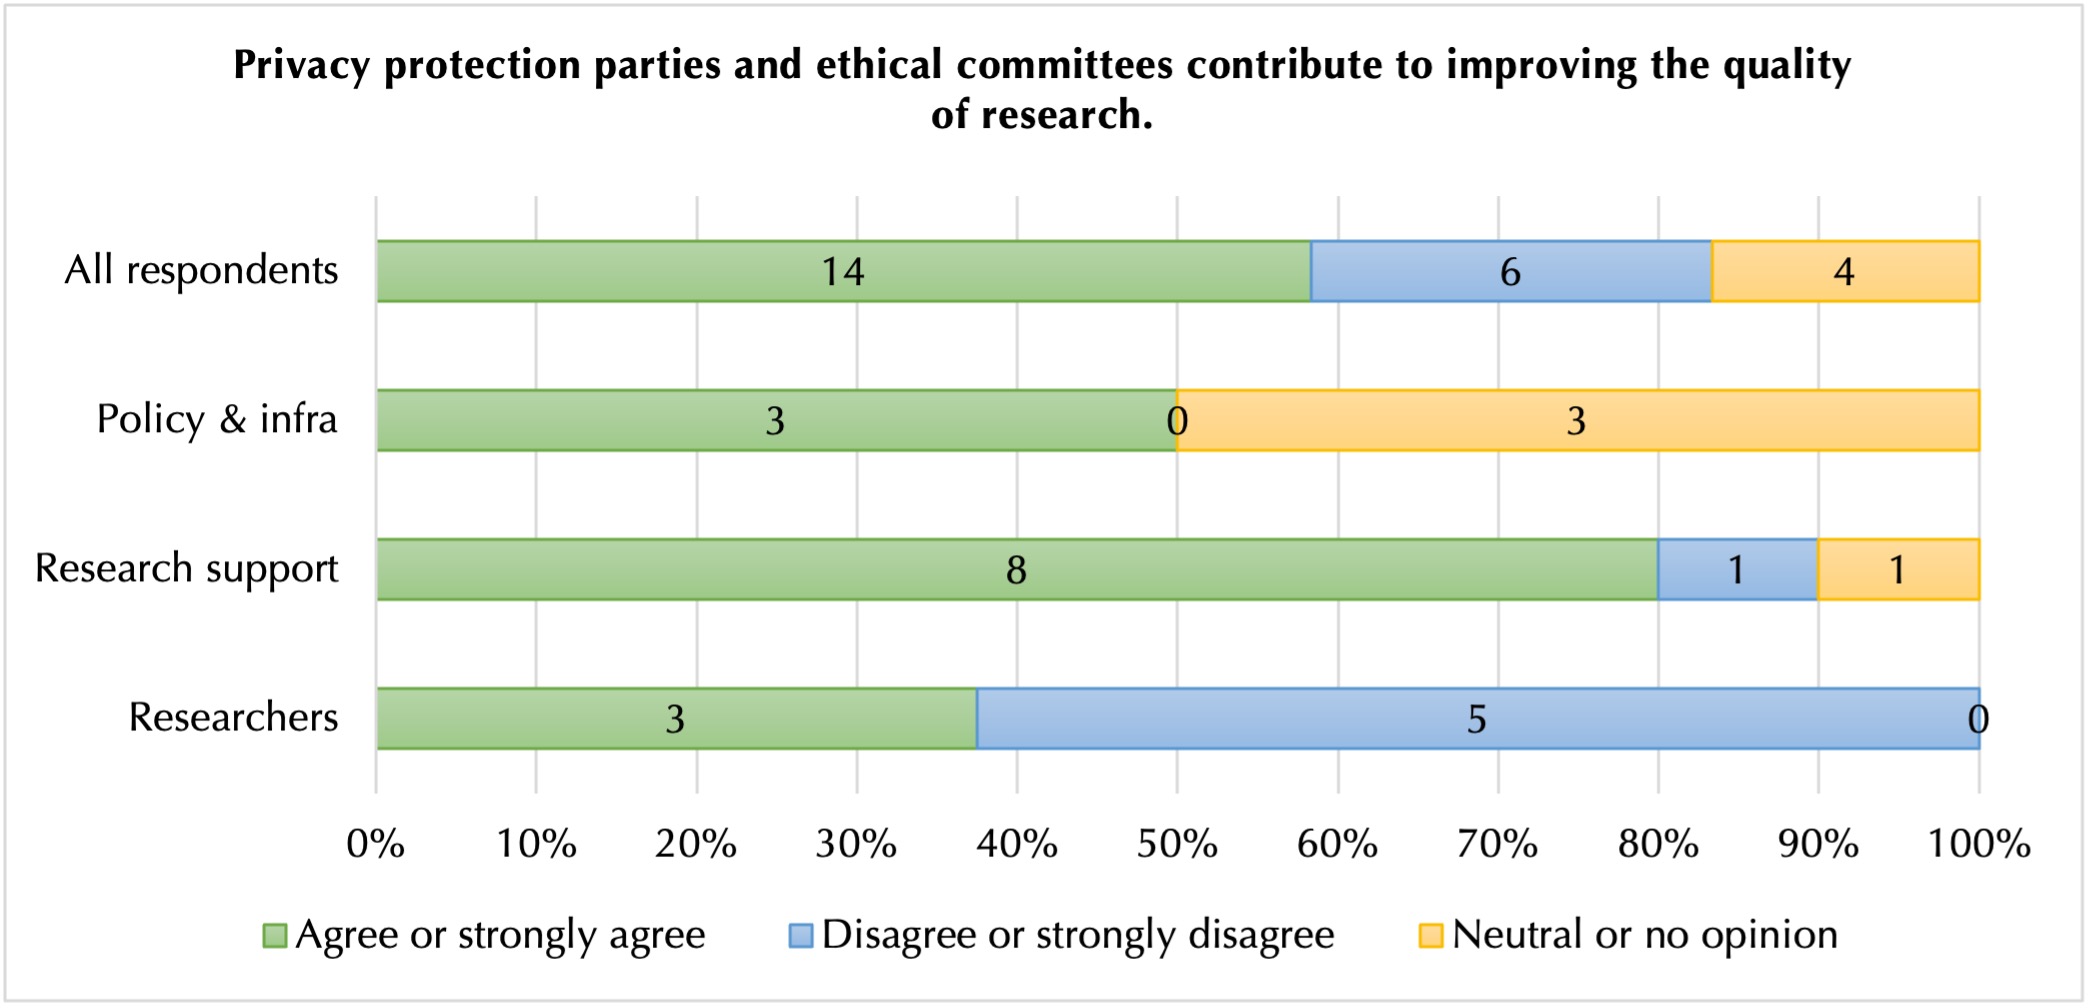 Participants’ views on privacy protection parties and their contribution to research quality